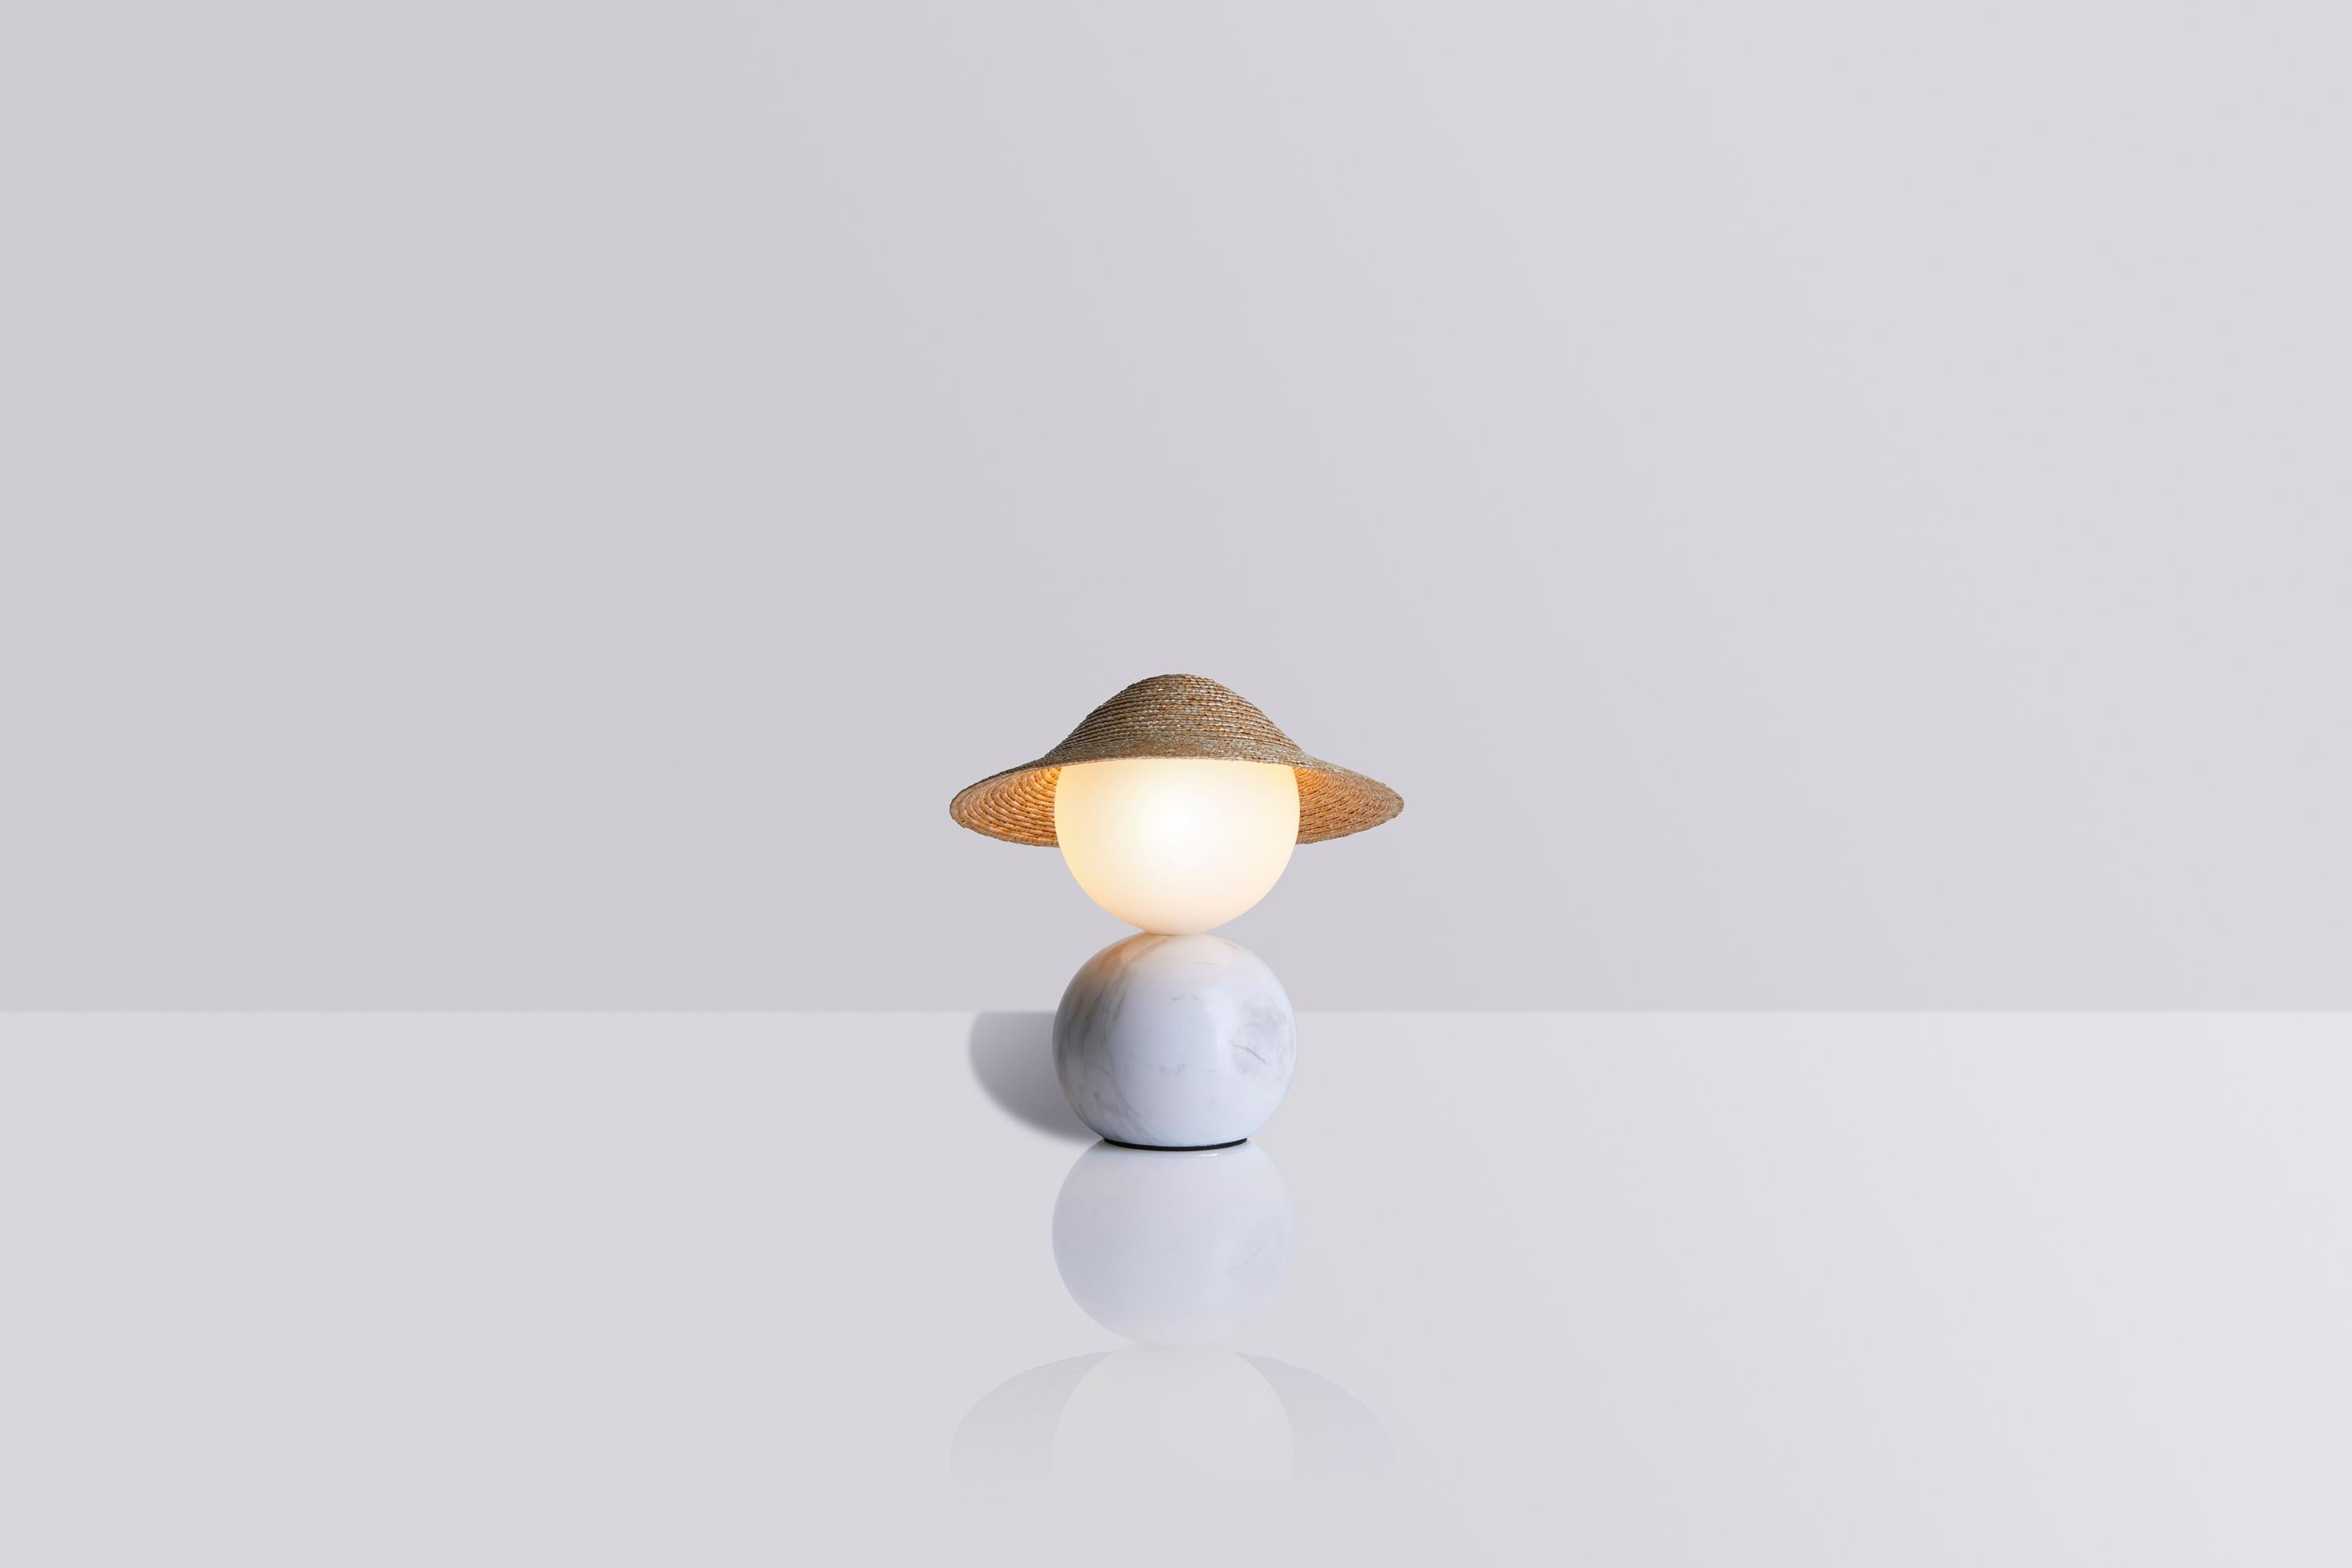 This version is the smallest member of the family and was created in 2022. It is characterised by its cute personality and the way the opaque glass head is balanced on its spherical body. As with every lighting object in Théros, it features a